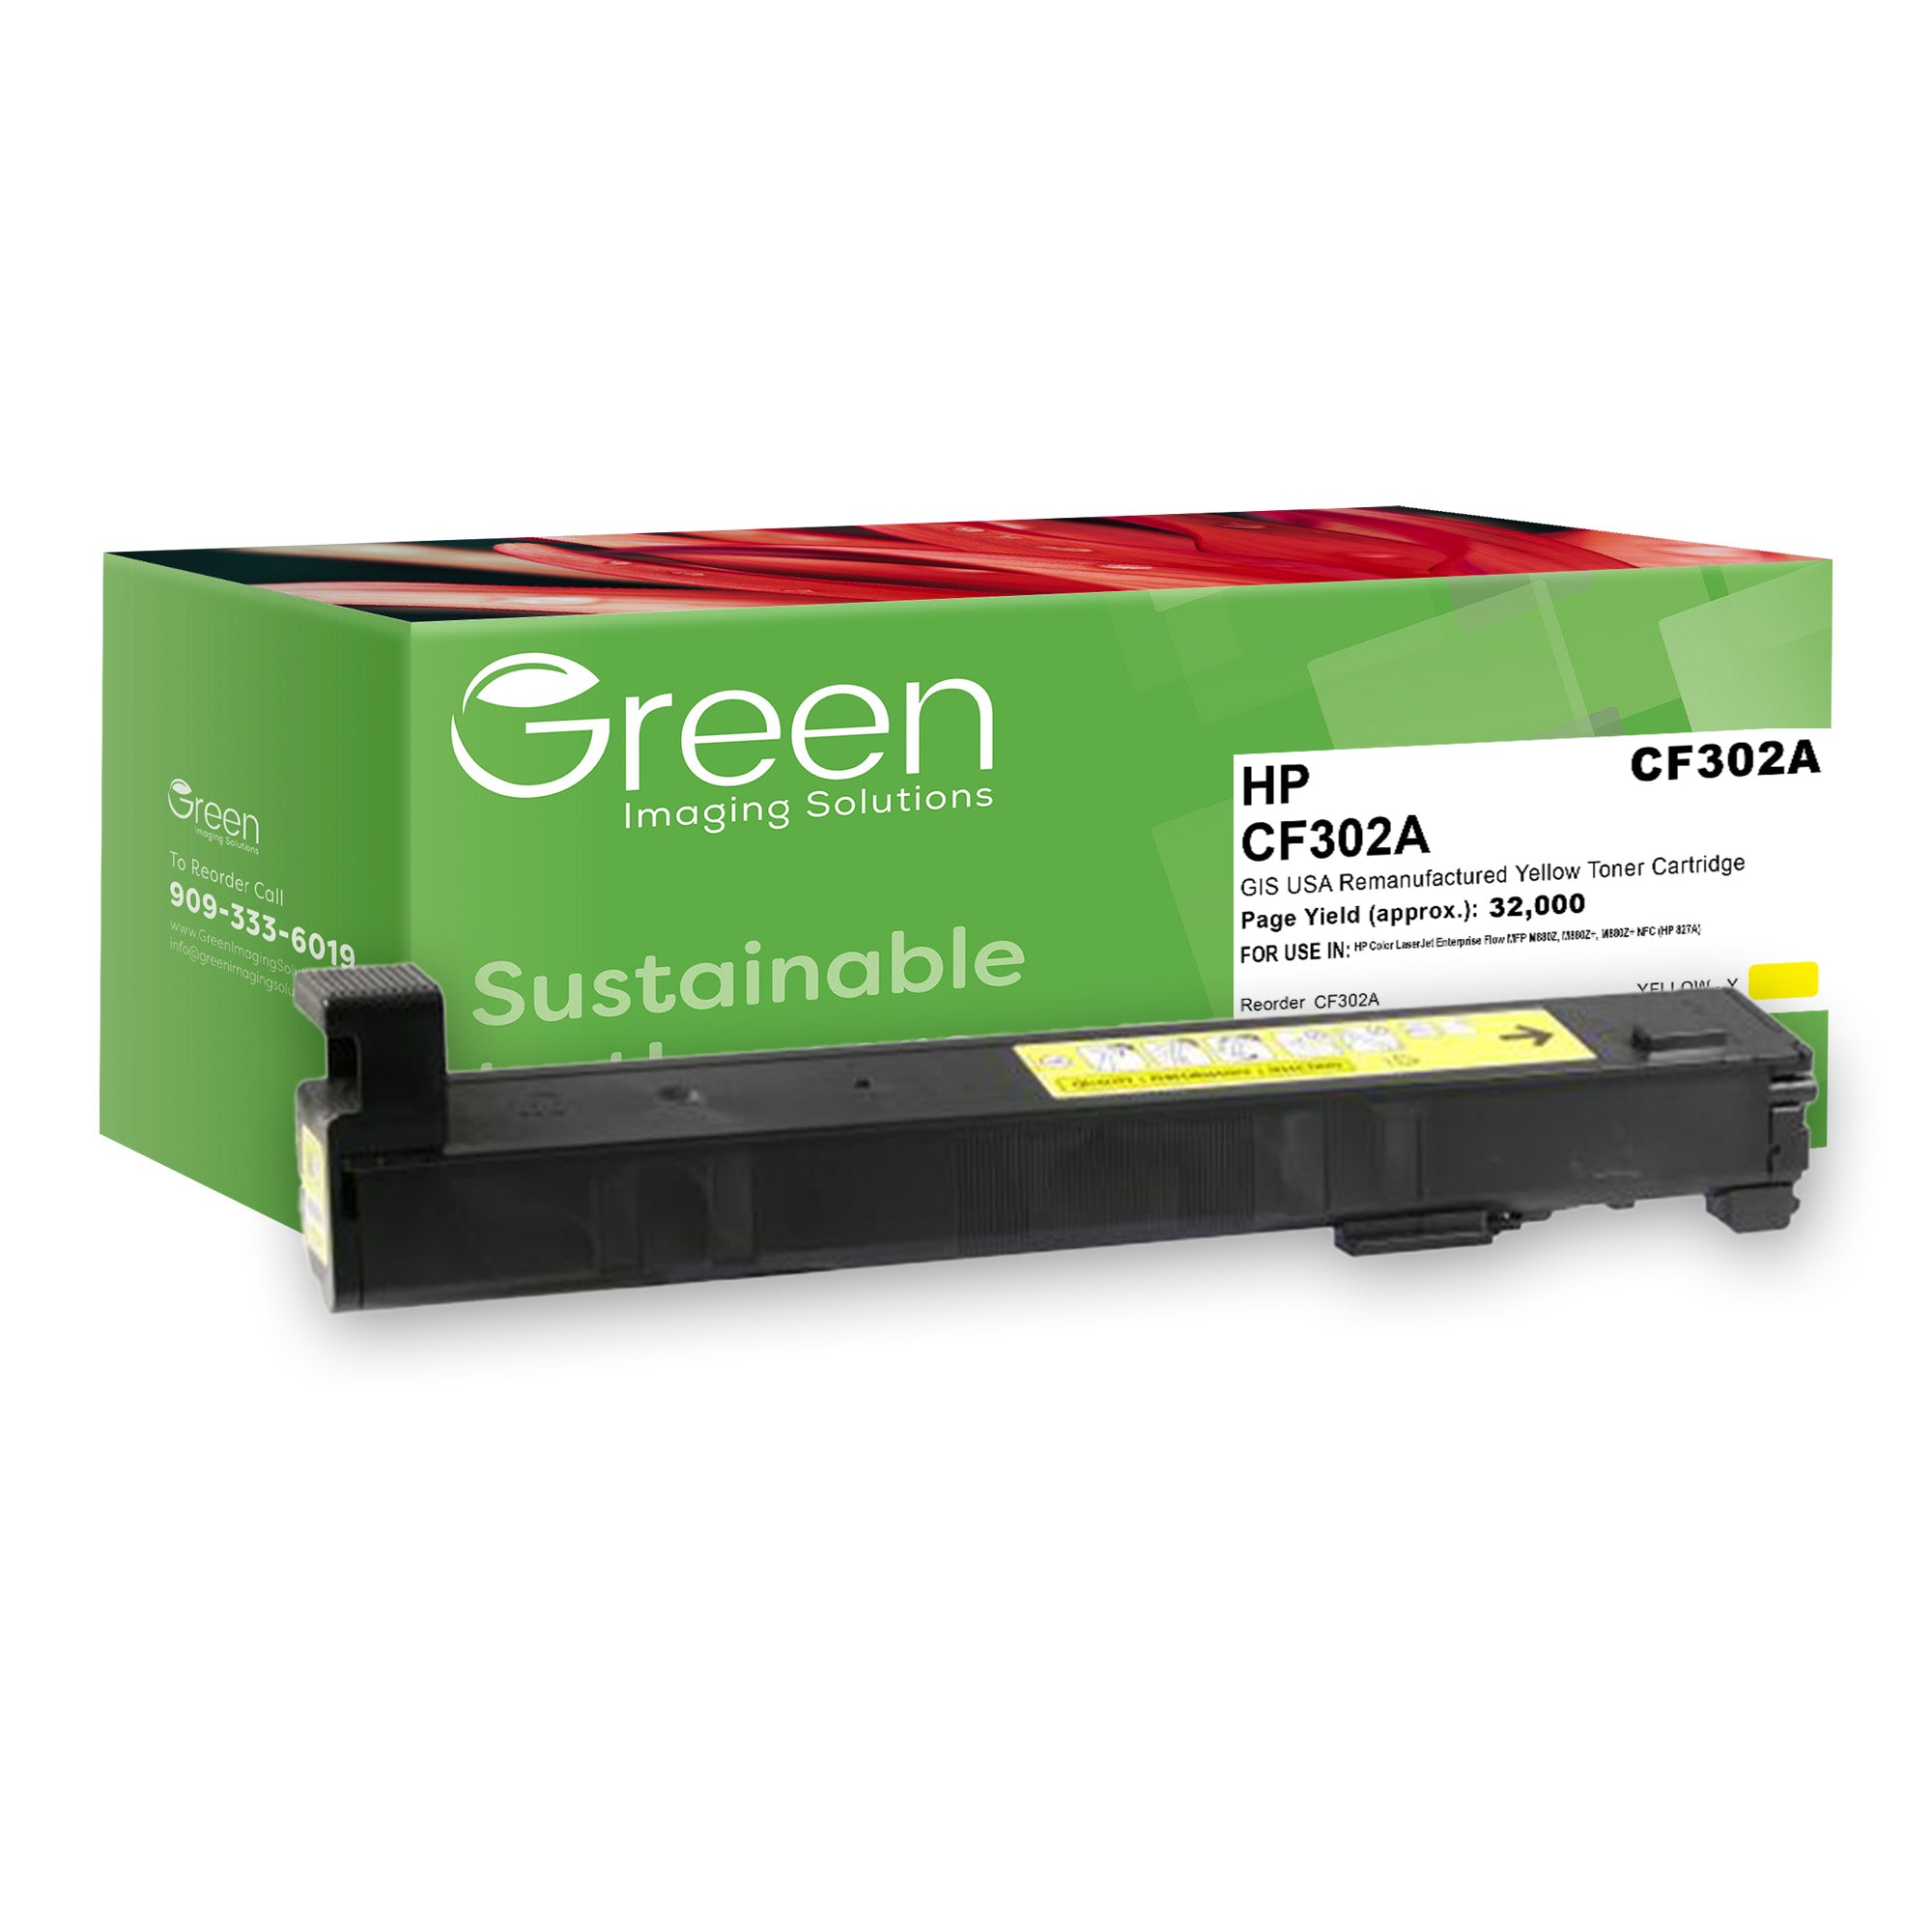 Yellow Toner Cartridge for HP 827A (CF302A) – Green Imaging Solutions